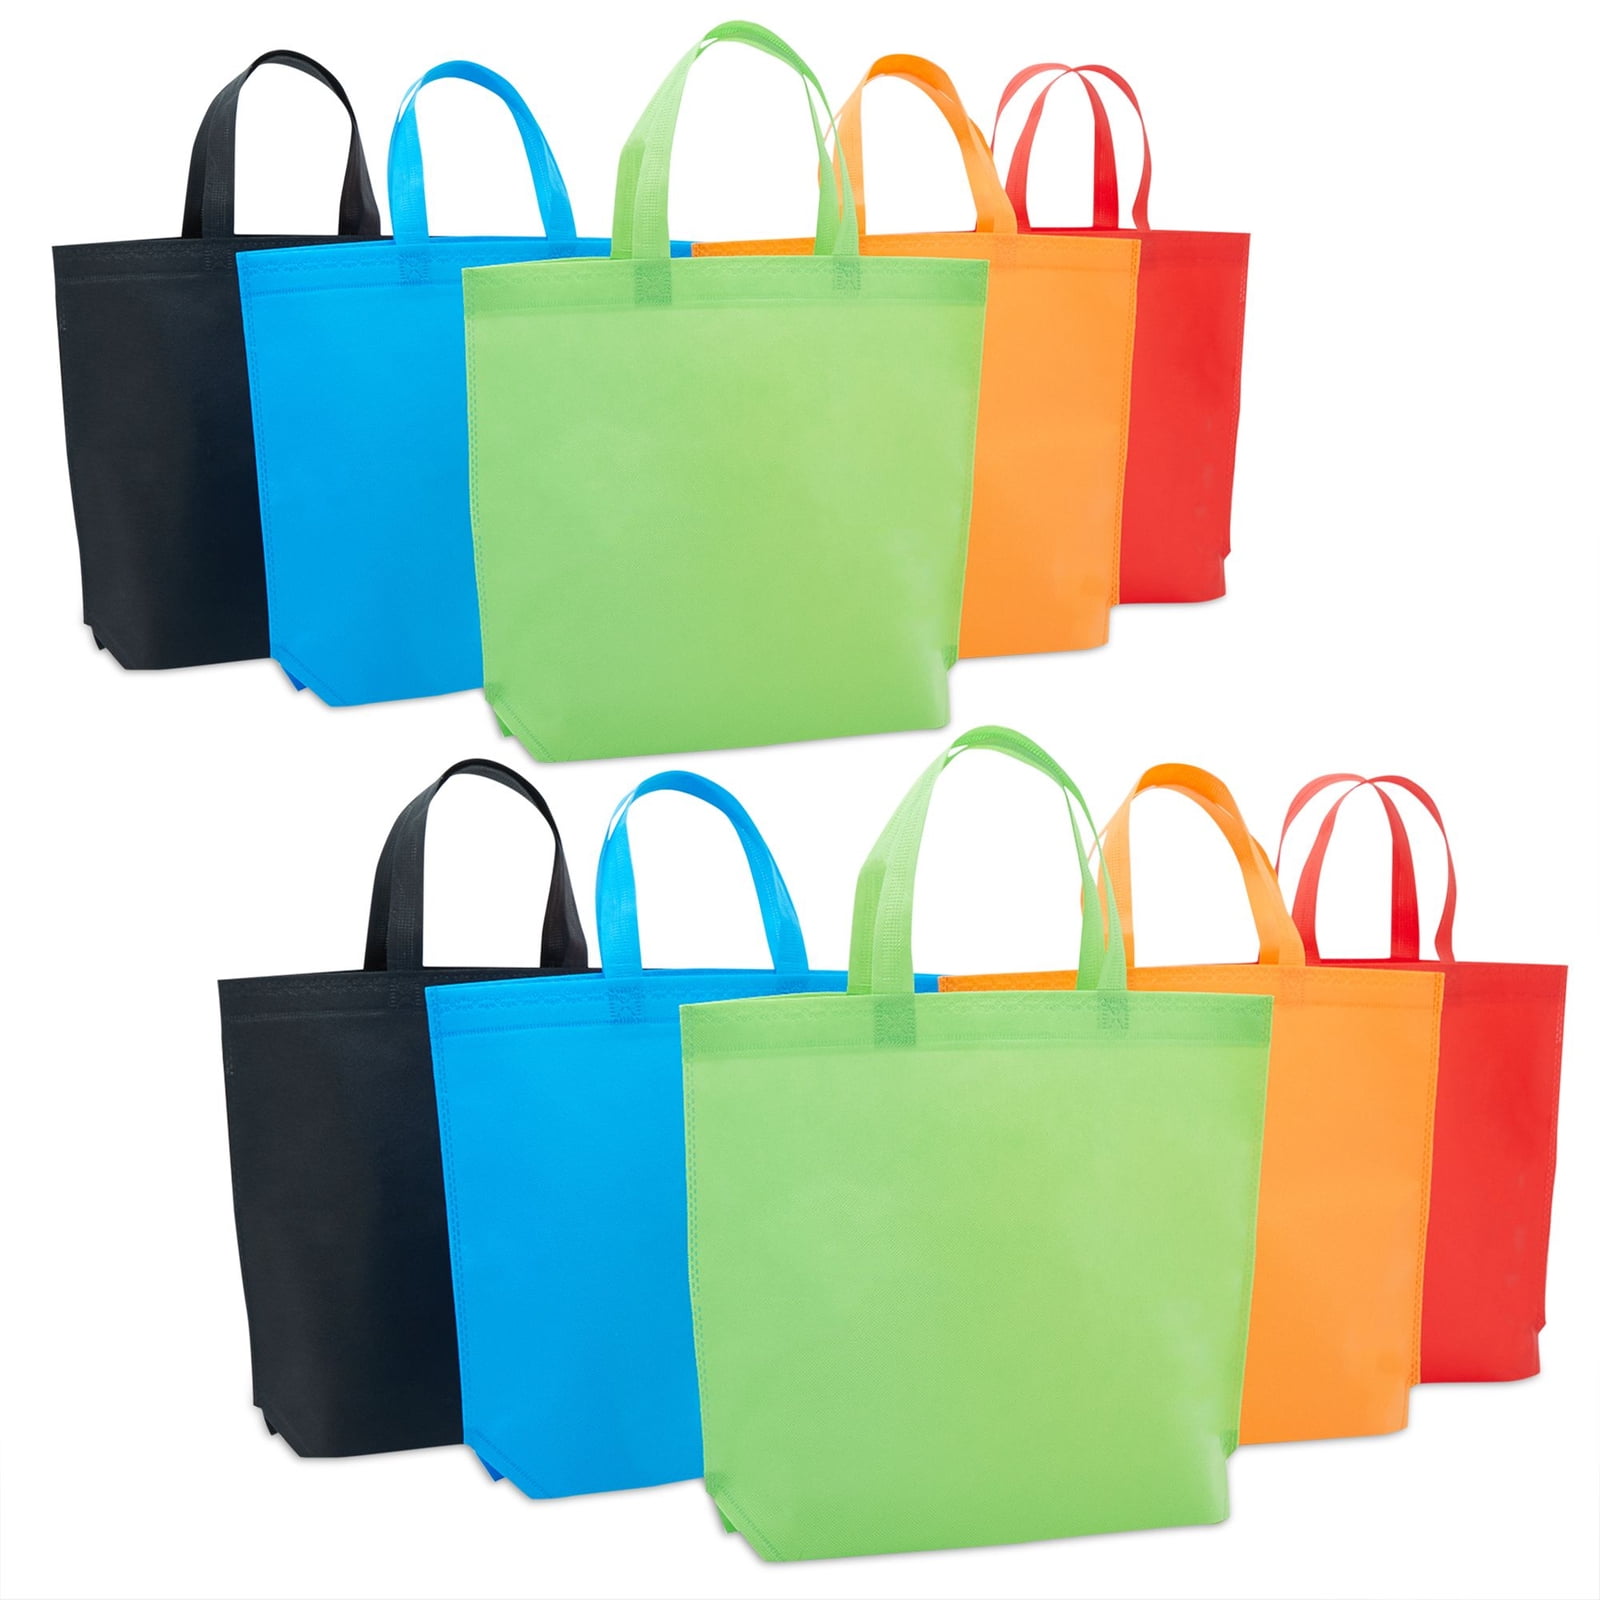 Extra Large Reusable Bags 21x13x14 Storage Shopping Bags Large Tote Bags for Carrying Bulk Items Prime Line Packaging 5 Pcs 